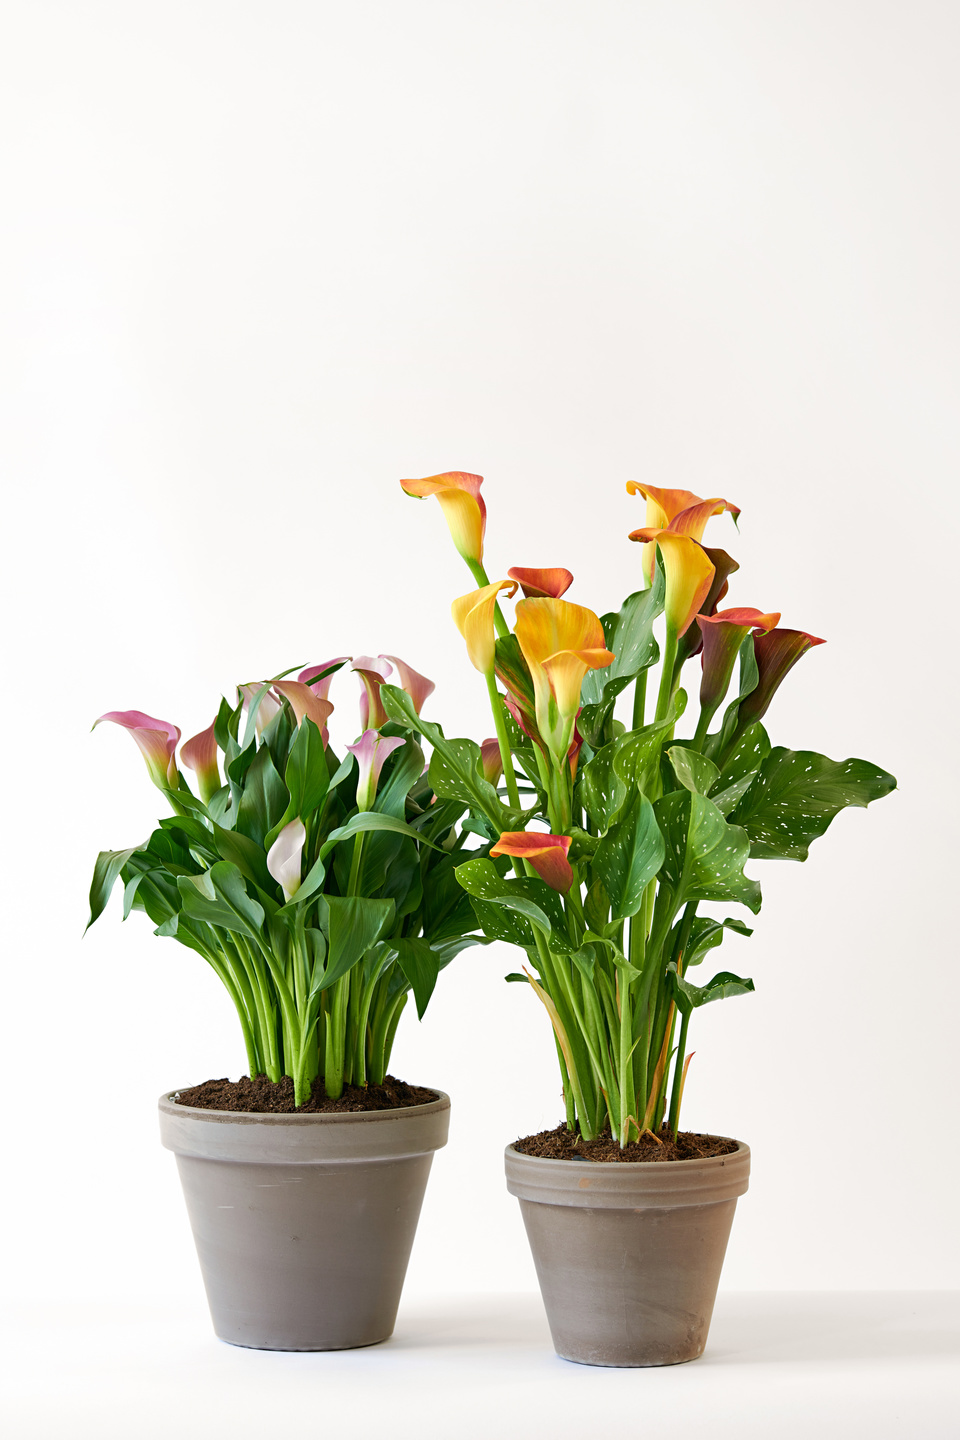 Calla Lily The Houseplant Of June 2020 Flower Council